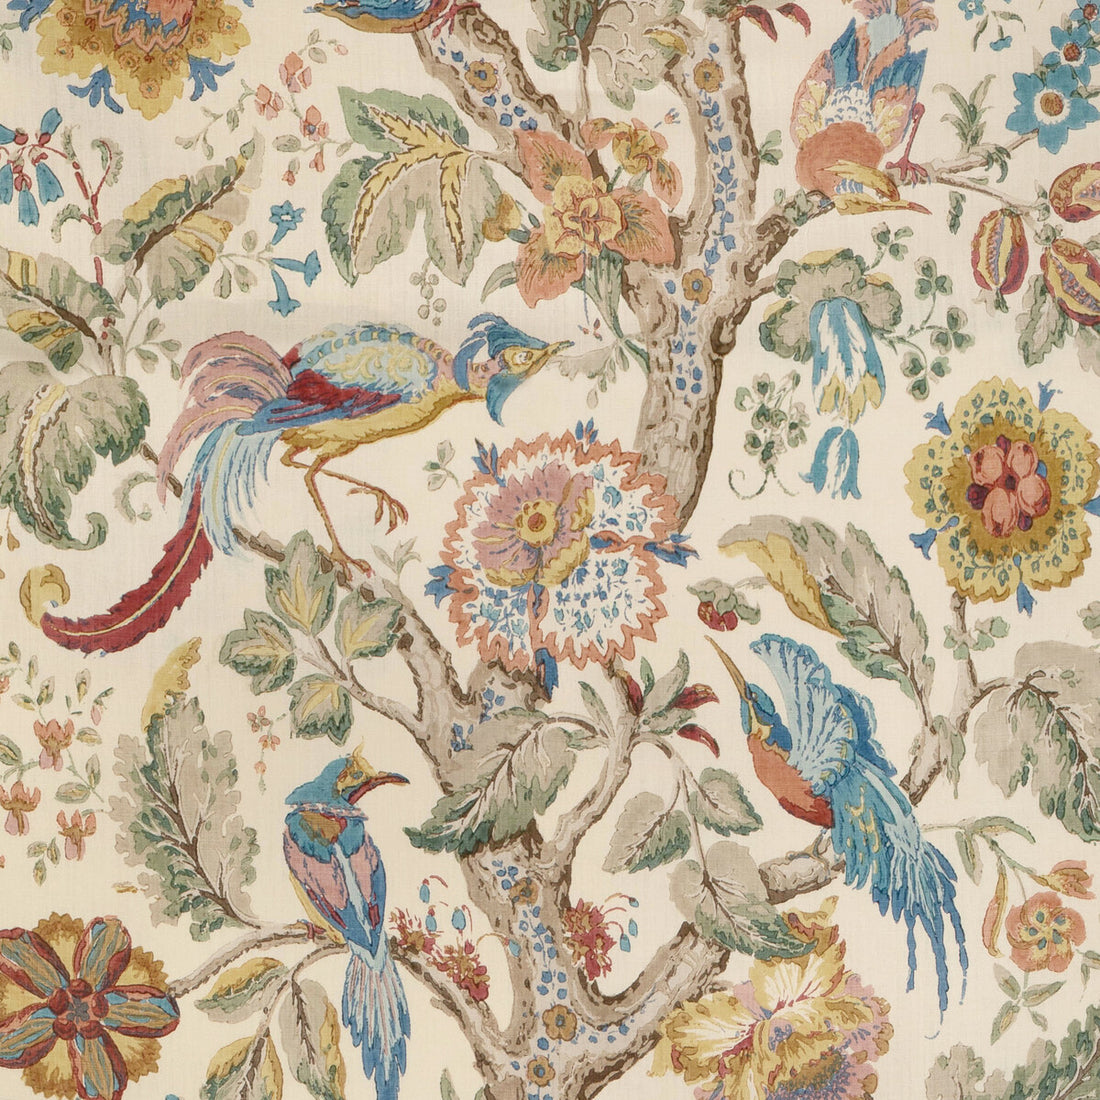 Tree Of Life fabric in denim/berry color - pattern 2023100.519.0 - by Lee Jofa in the Lee Jofa 200 collection